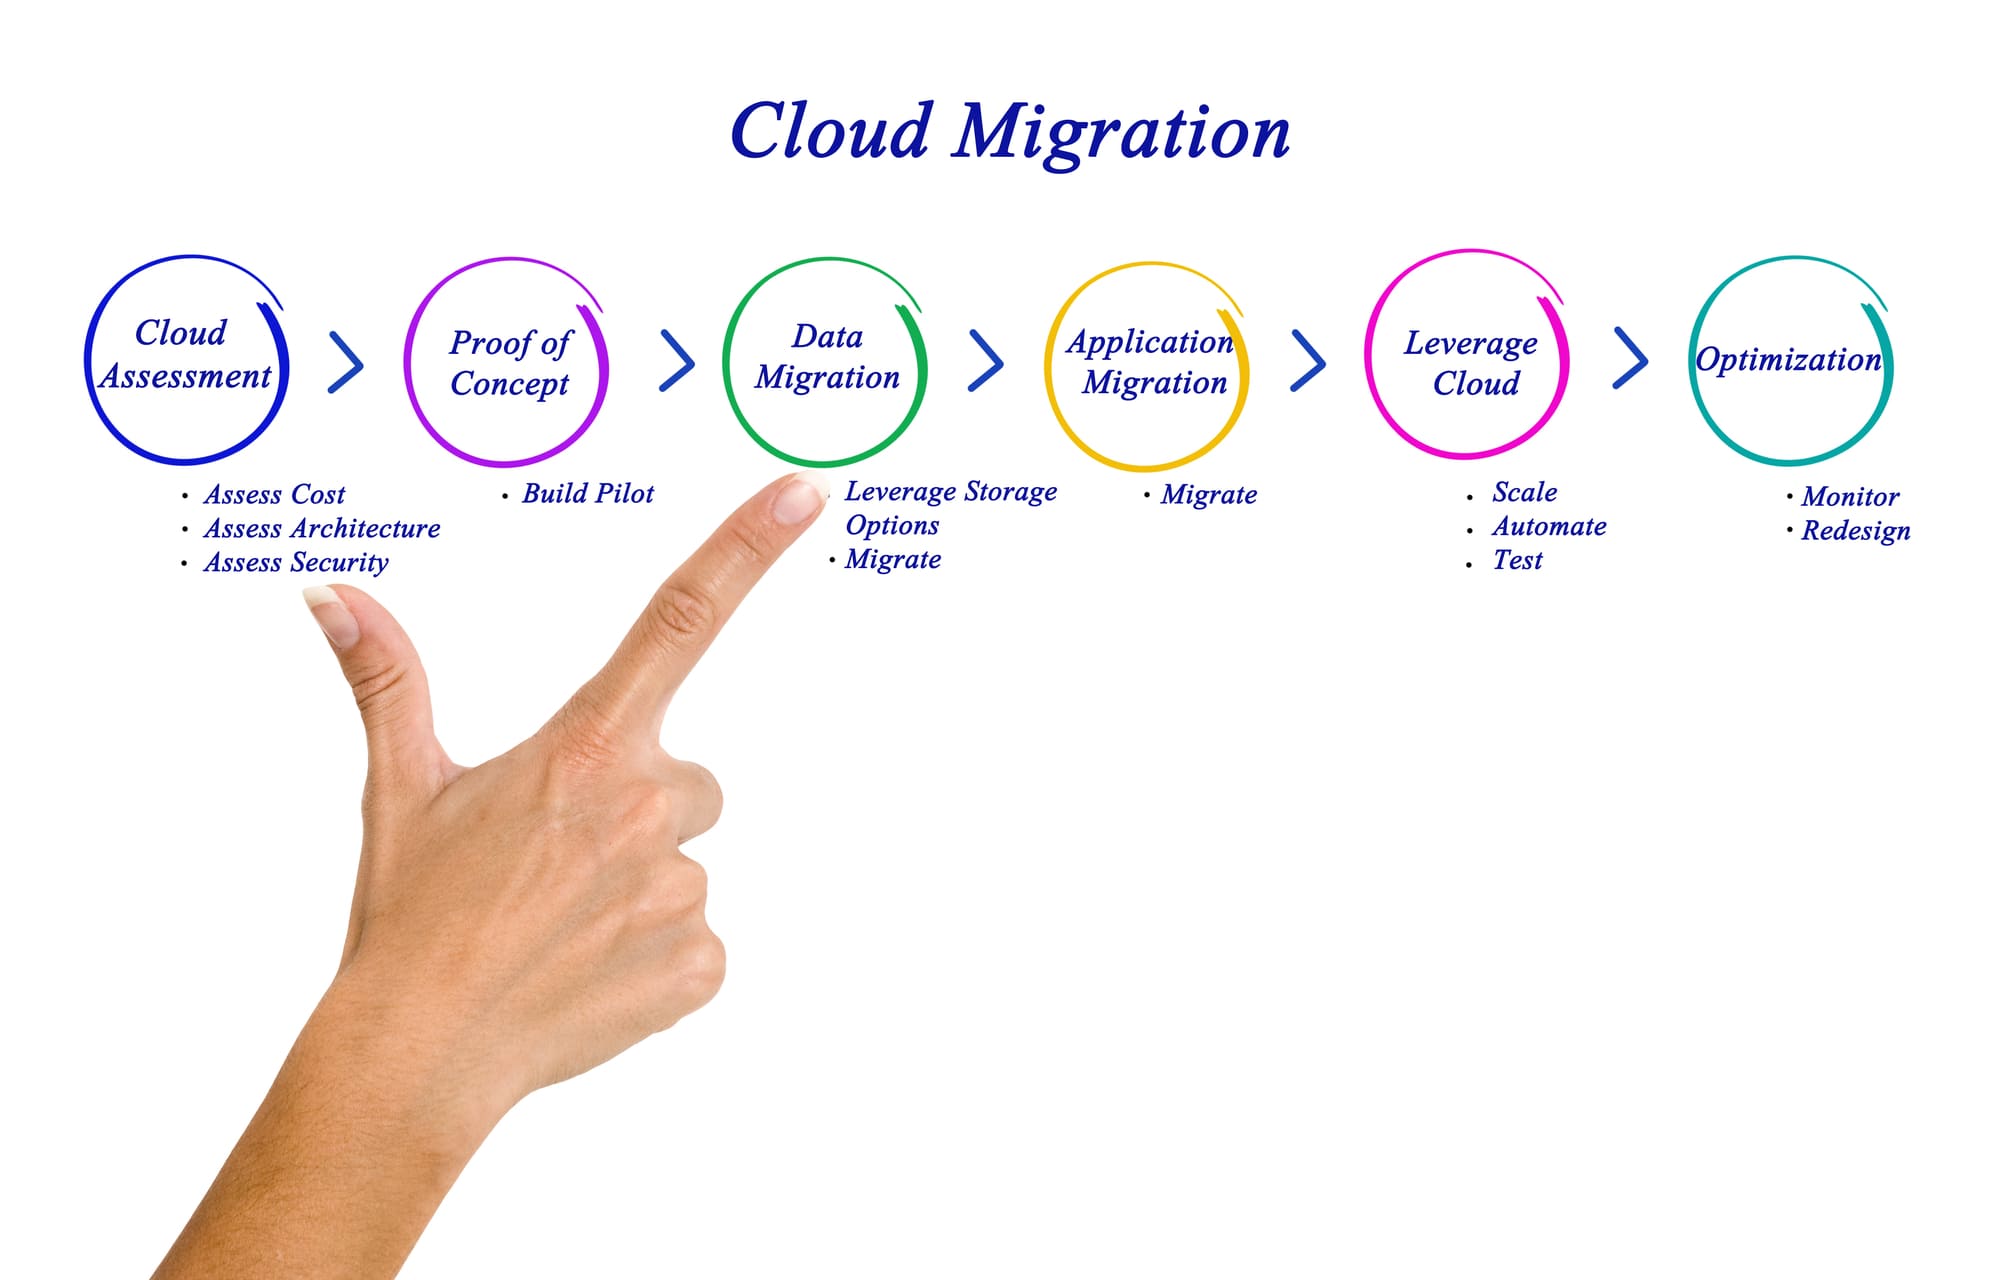 5 Key Questions to Ask Before a Cloud Migration